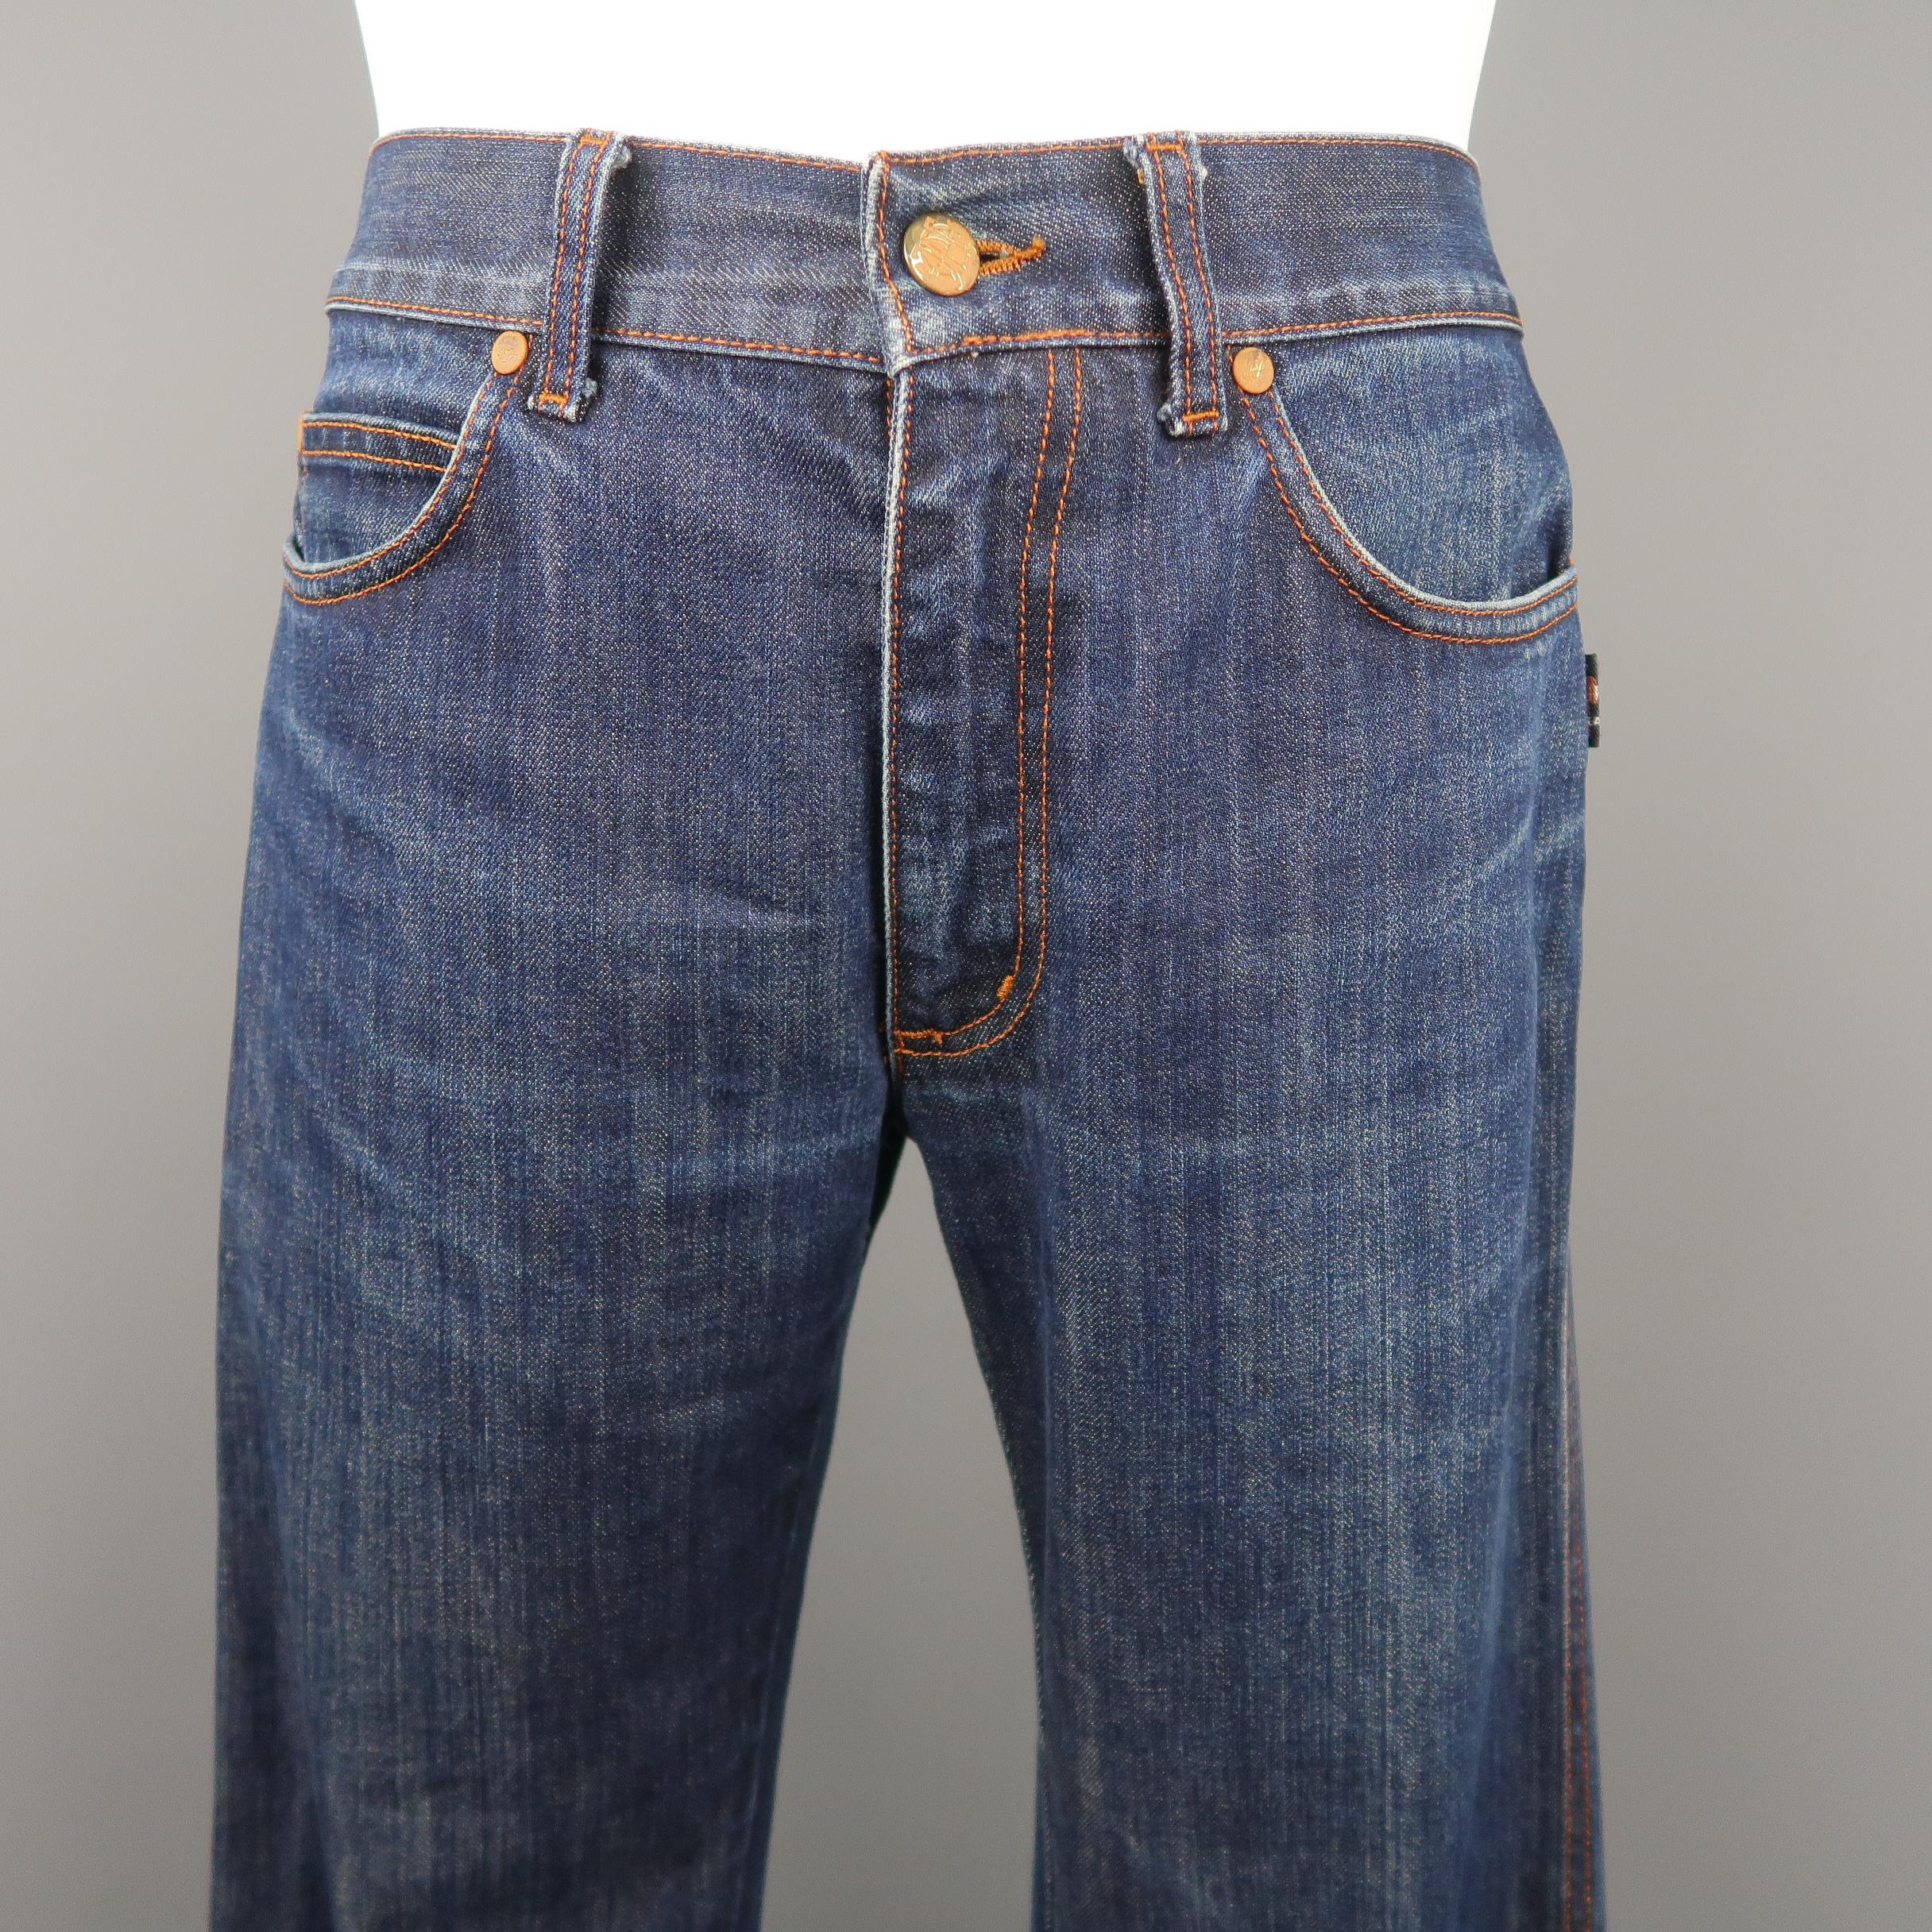 Vintage JPG JEANS by JEAN PAUL GAULTIER jeans come in dark washed denim with rust contrast stitching and hardware and extended cuffed hem with print on left leg. Made in Italy.
 
Excellent Pre-Owned Condition.
Marked: 31
 
Measurements:
 
Waist: 31